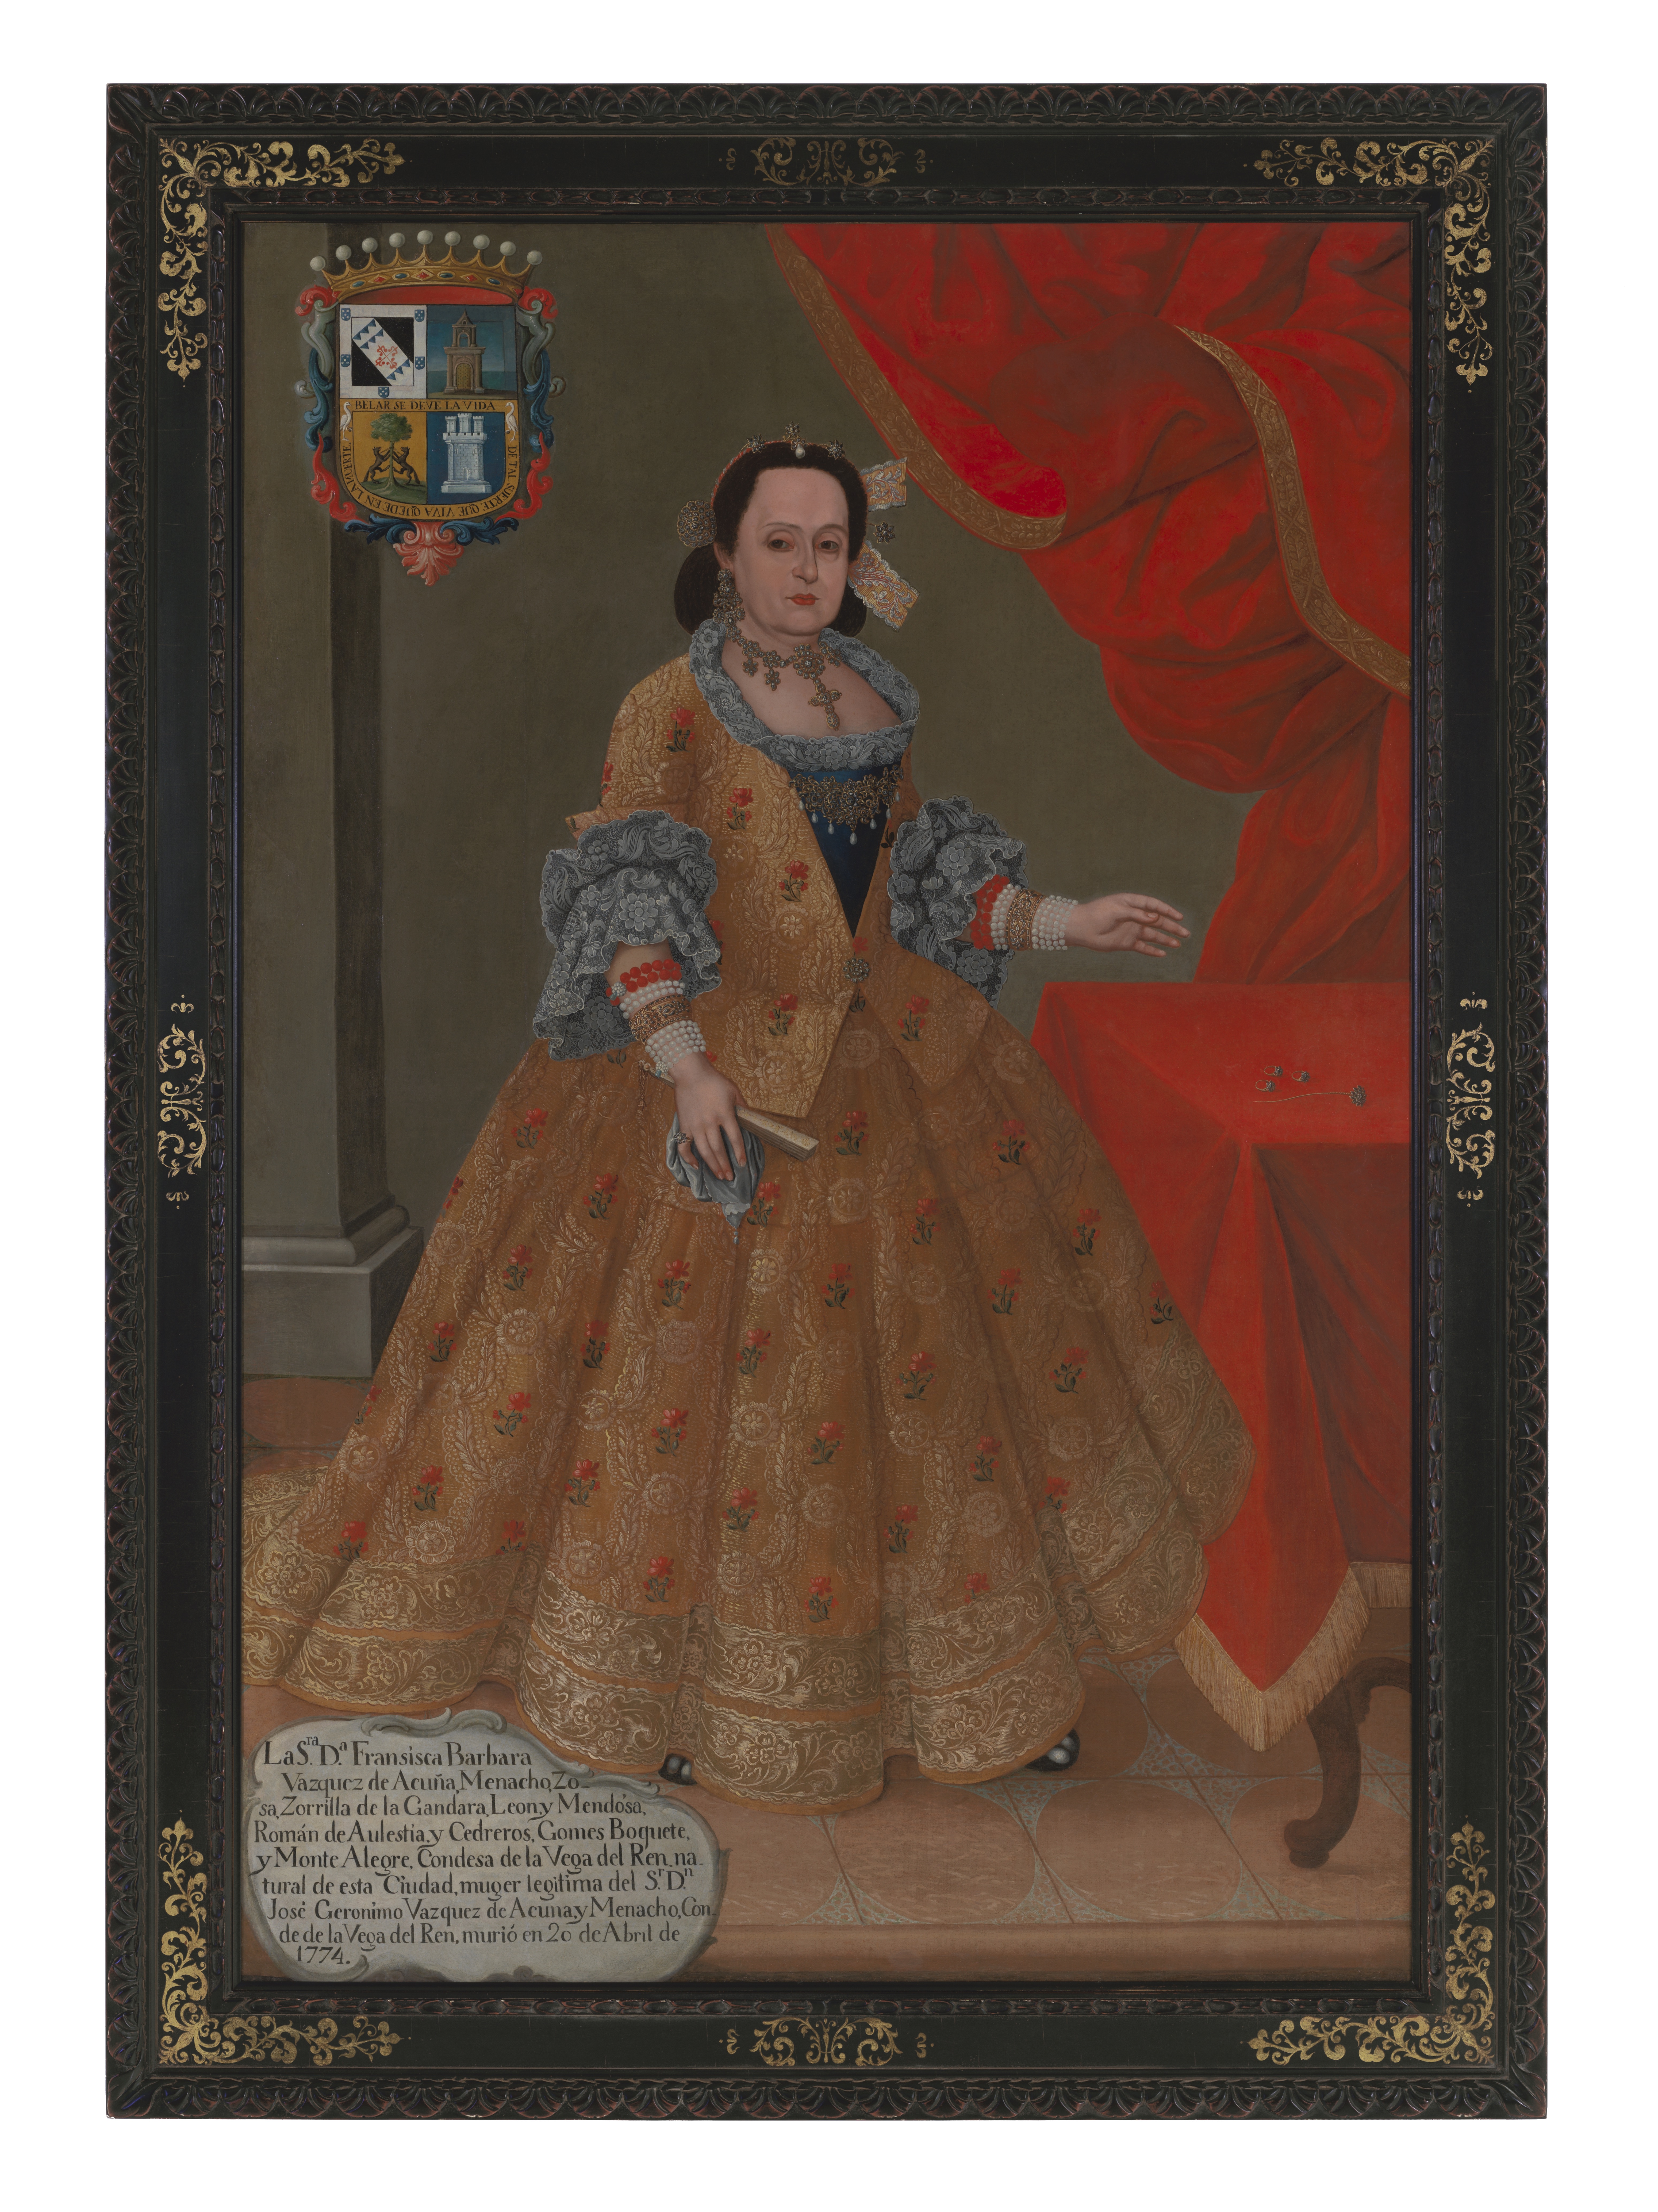 A painting depicting a woman in an opulent brocade dress in front of a table and wall draped in red fabric. Her coat of arms is at the top left corner and a cartouche with her biography is in the bottom left.